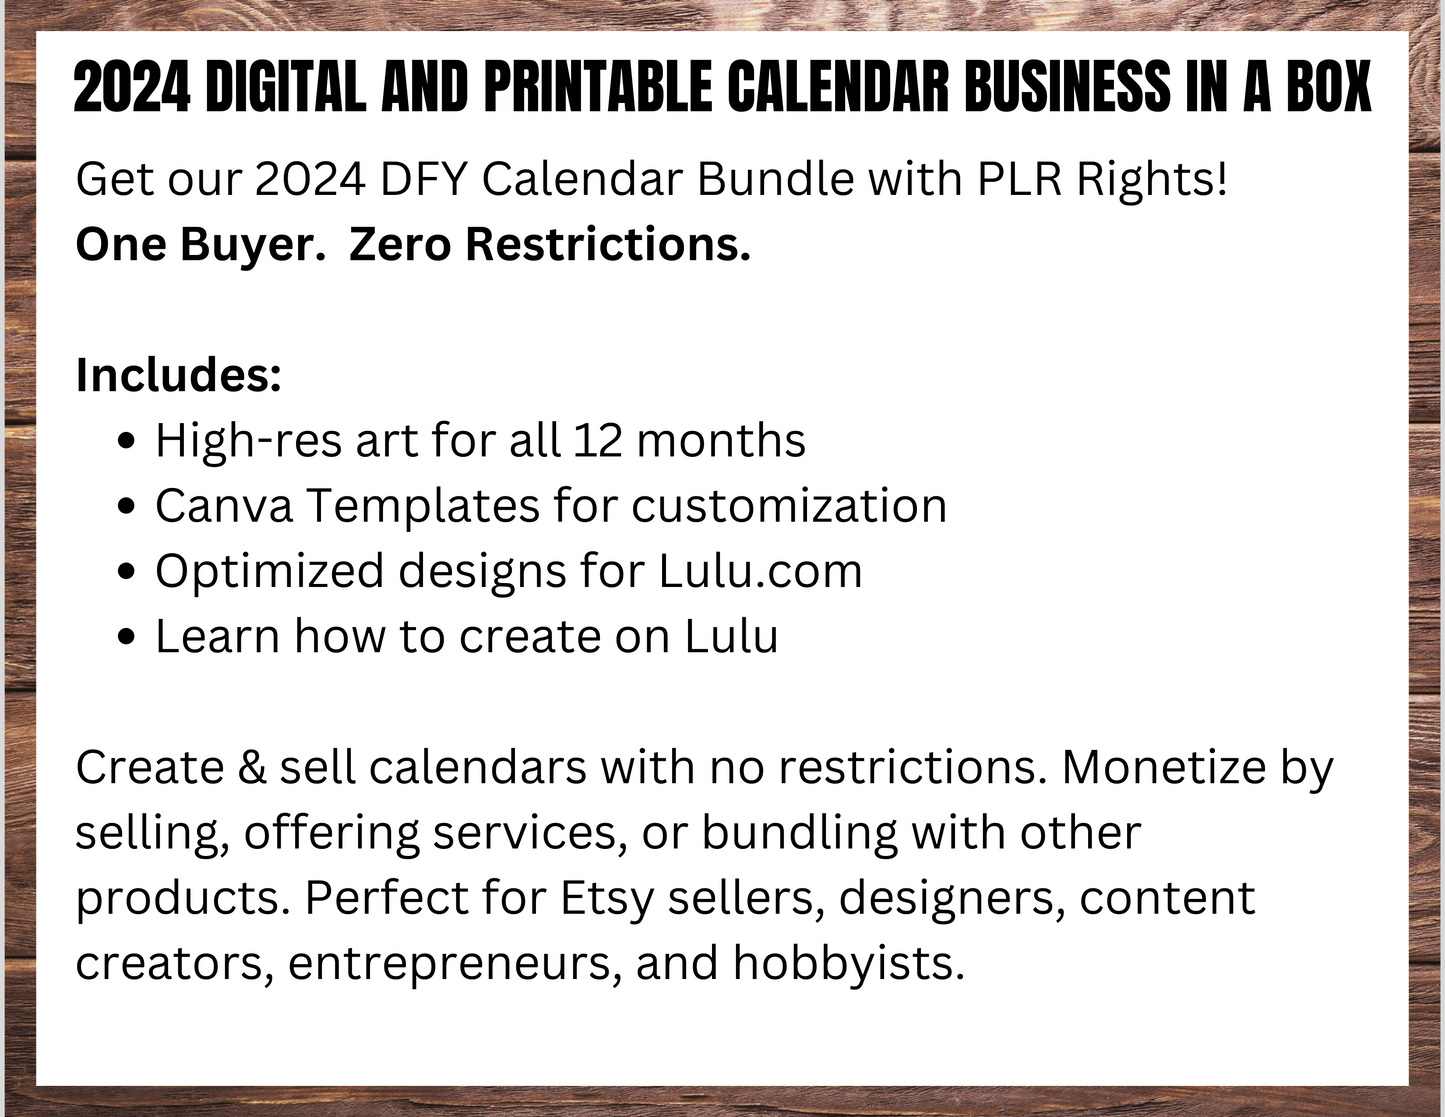 008-BKB | Create & Sell Your Own 2024 Calendars | DFY Designs & Templates